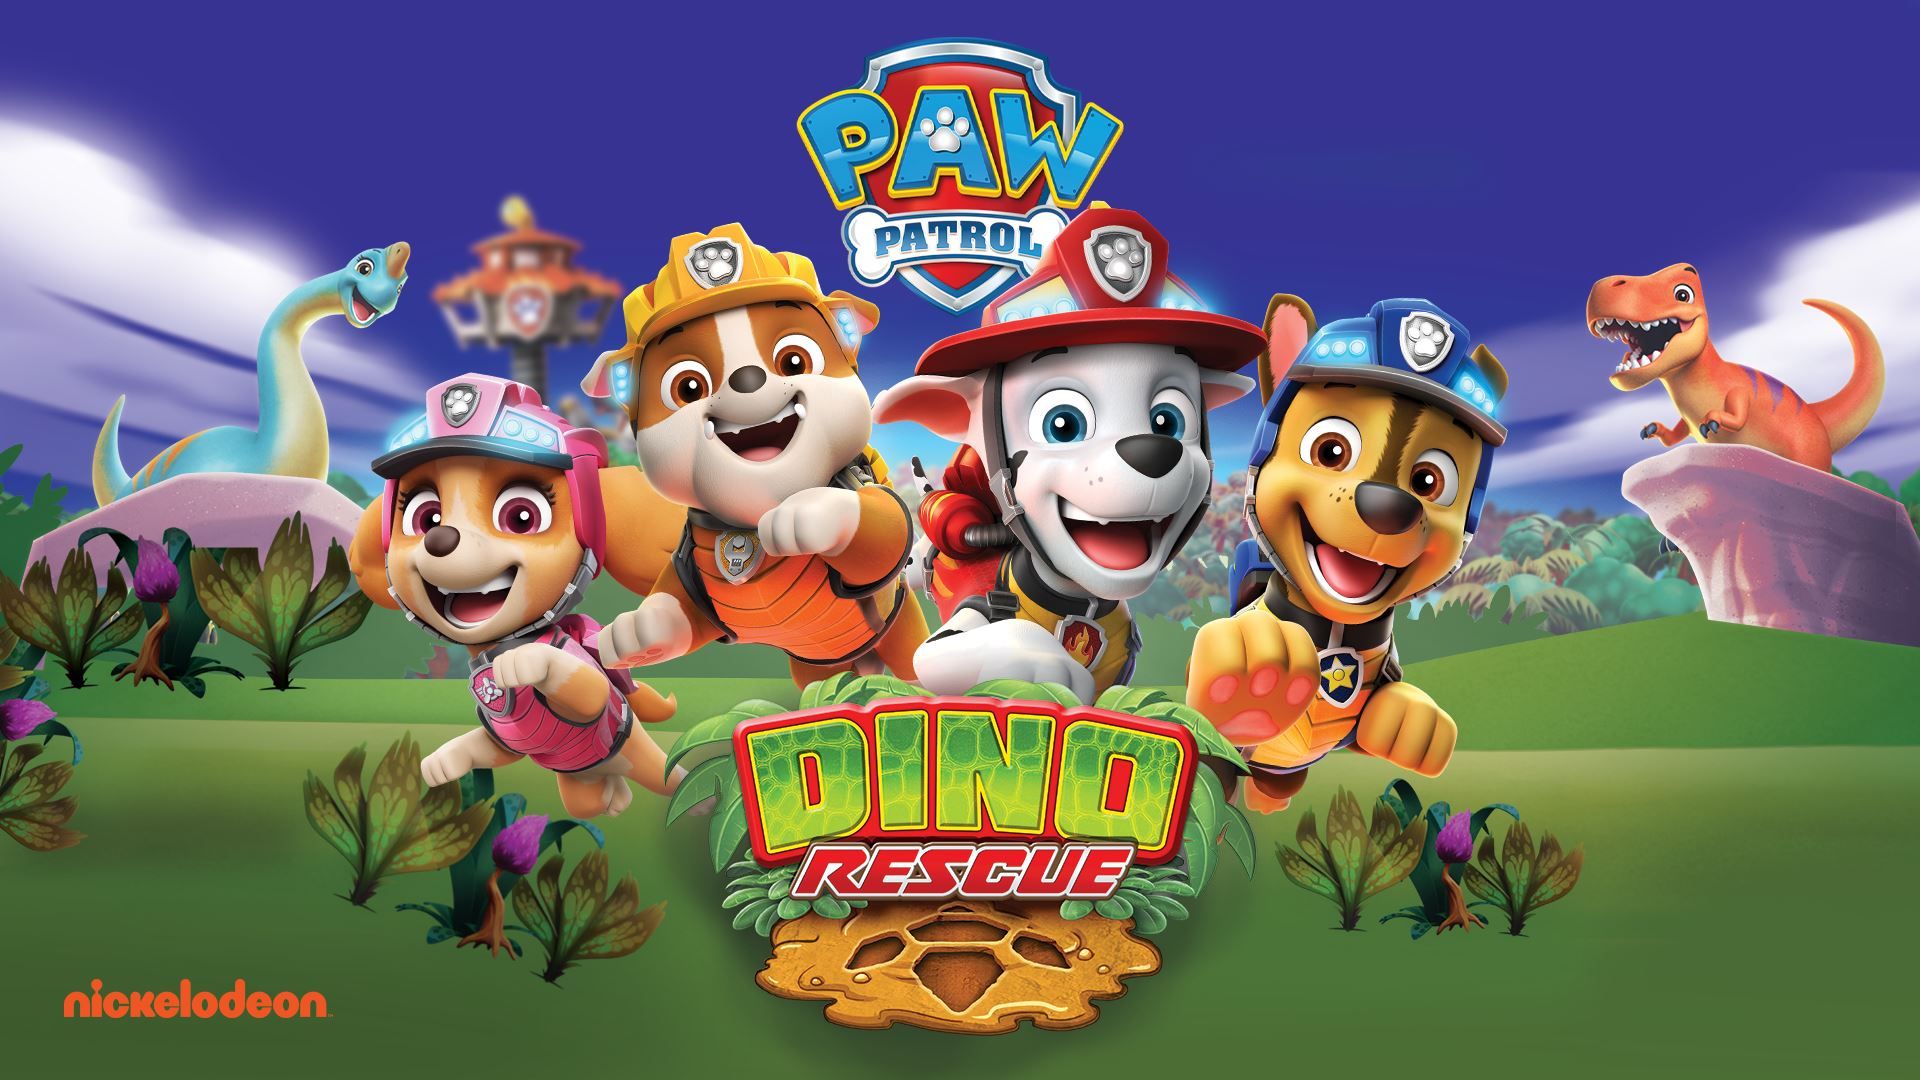 PAW Patrol Dino Rescue Wallpapers - Wallpaper Cave